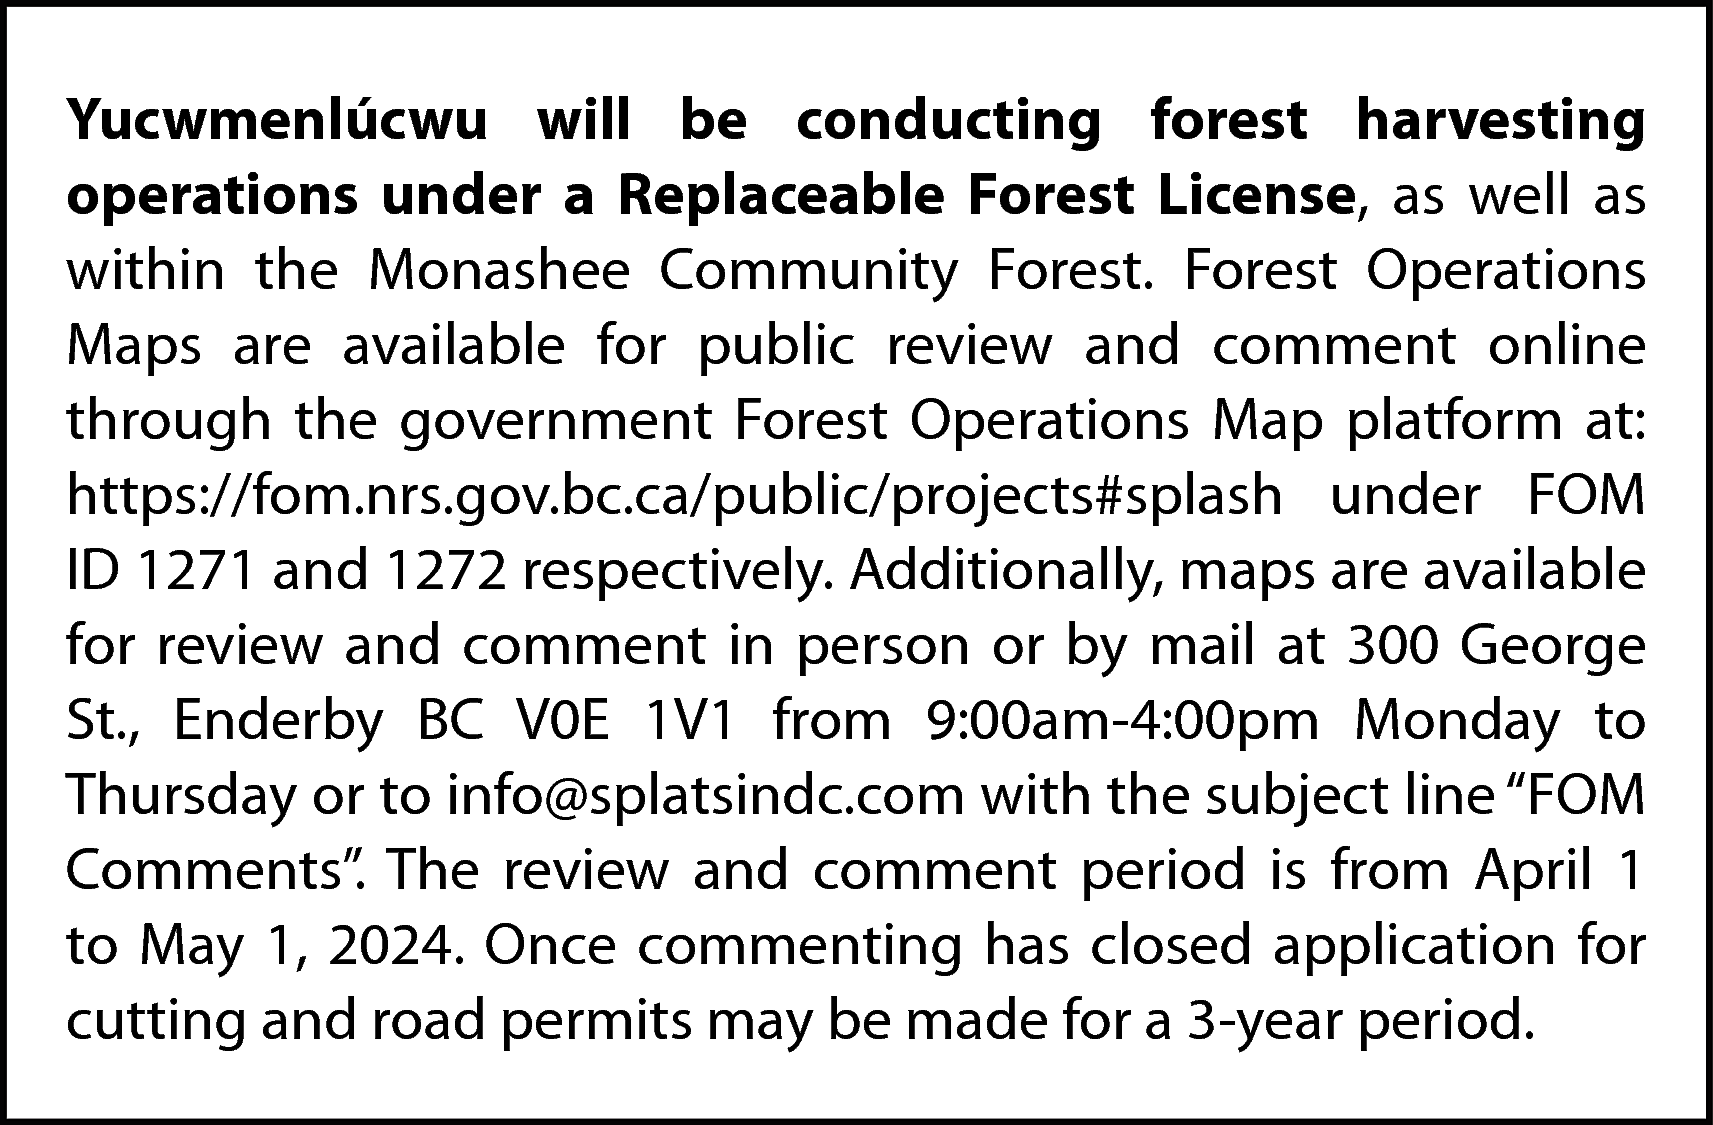 Yucwmenlúcwu will be conducting forest  Yucwmenlúcwu will be conducting forest harvesting  operations under a Replaceable Forest License, as well as  within the Monashee Community Forest. Forest Operations  Maps are available for public review and comment online  through the government Forest Operations Map platform at:  https://fom.nrs.gov.bc.ca/public/projects#splash under FOM  ID 1271 and 1272 respectively. Additionally, maps are available  for review and comment in person or by mail at 300 George  St., Enderby BC V0E 1V1 from 9:00am-4:00pm Monday to  Thursday or to info@splatsindc.com with the subject line “FOM  Comments”. The review and comment period is from April 1  to May 1, 2024. Once commenting has closed application for  cutting and road permits may be made for a 3-year period.    